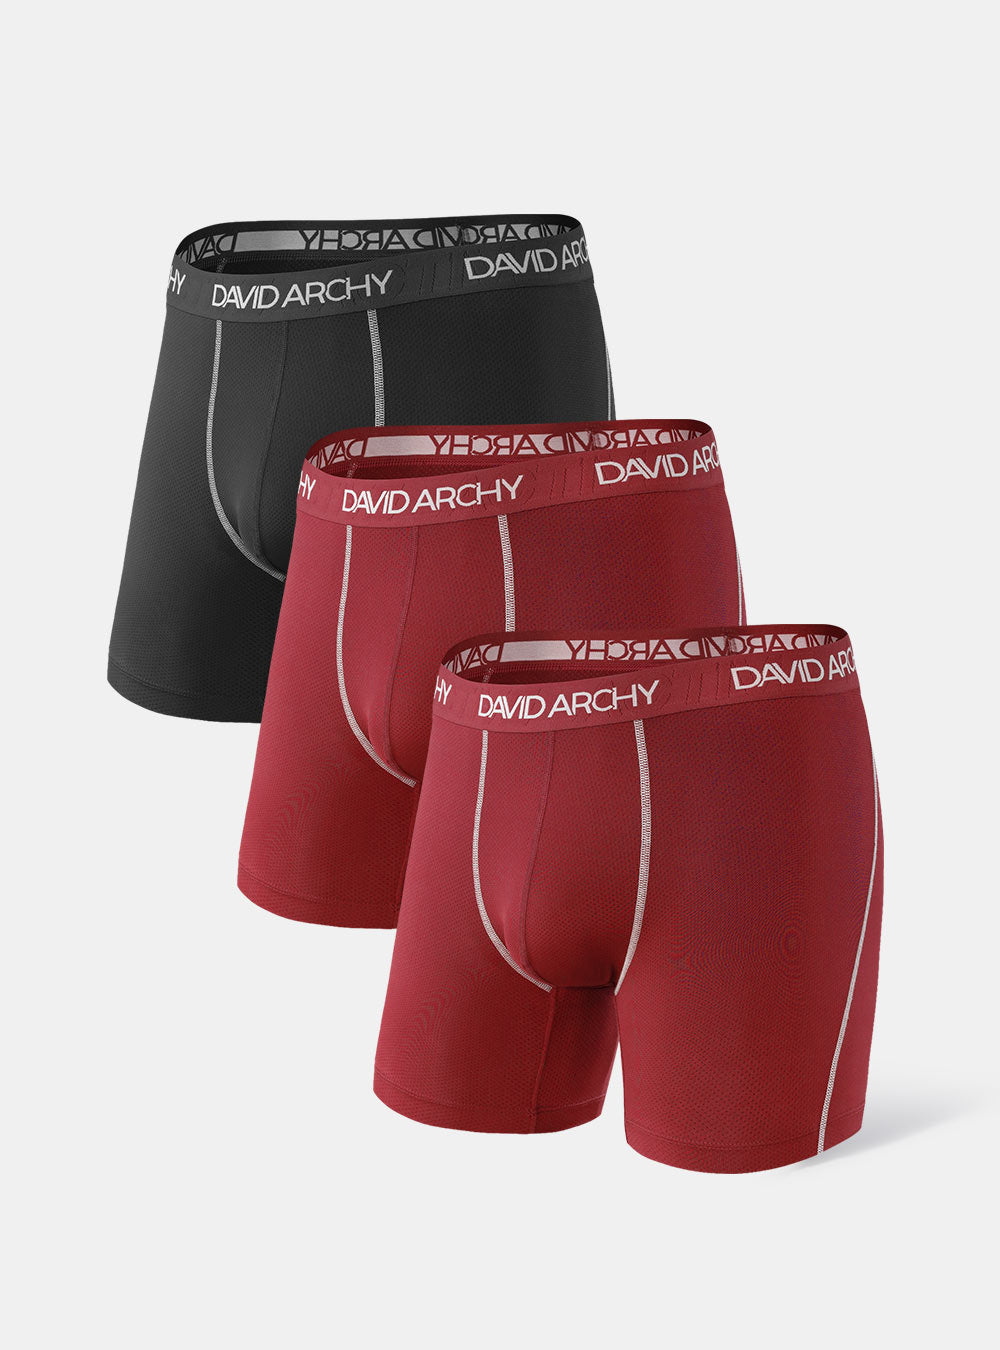 David Archy 3 Packs Boxer Brief Mesh Quick Dry Sports Sports Colorful  Underwear For Men